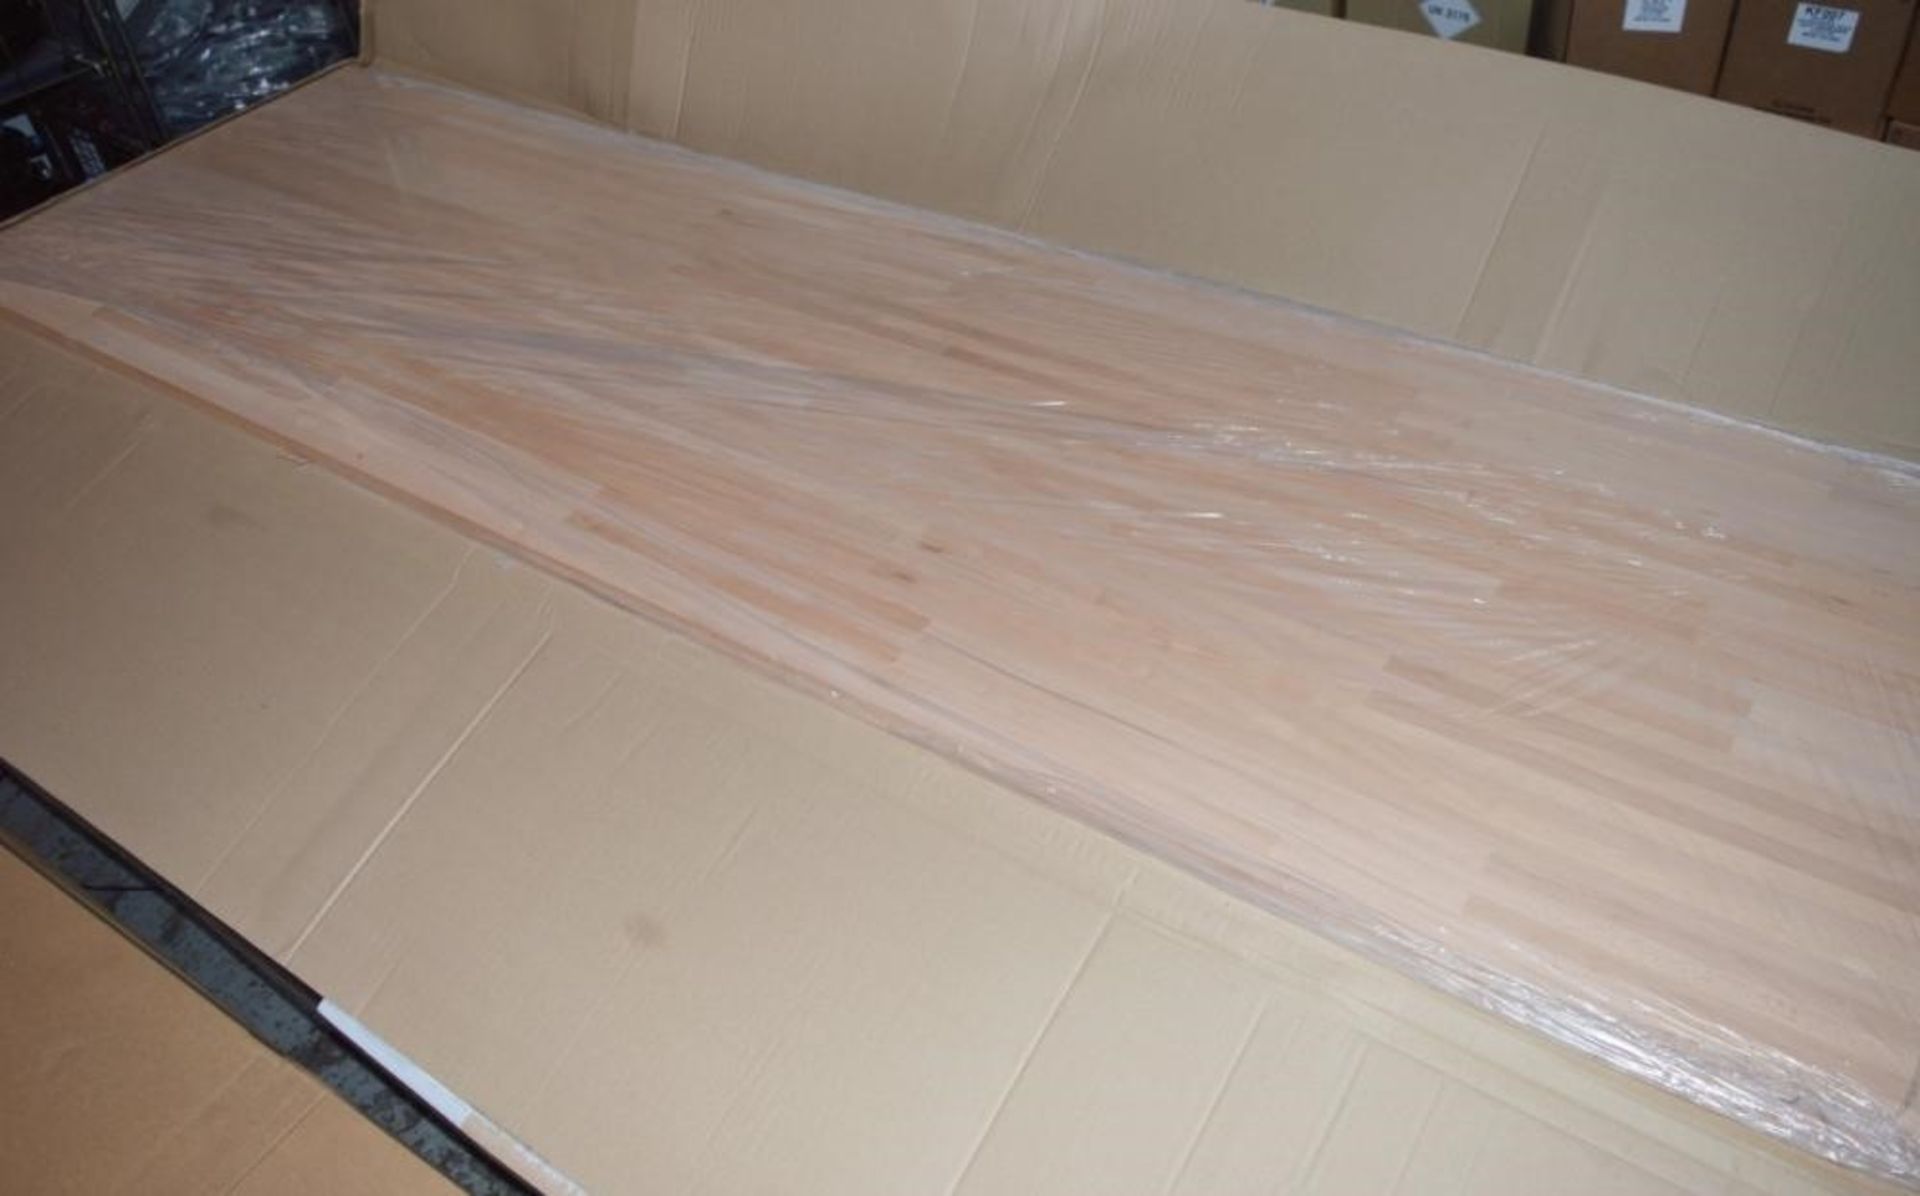 1 x Solid Wood Kitchen Worktop - PRIME BEECH - First Grade Finger Jointed Kitchen Worktop - Size: - Image 5 of 5